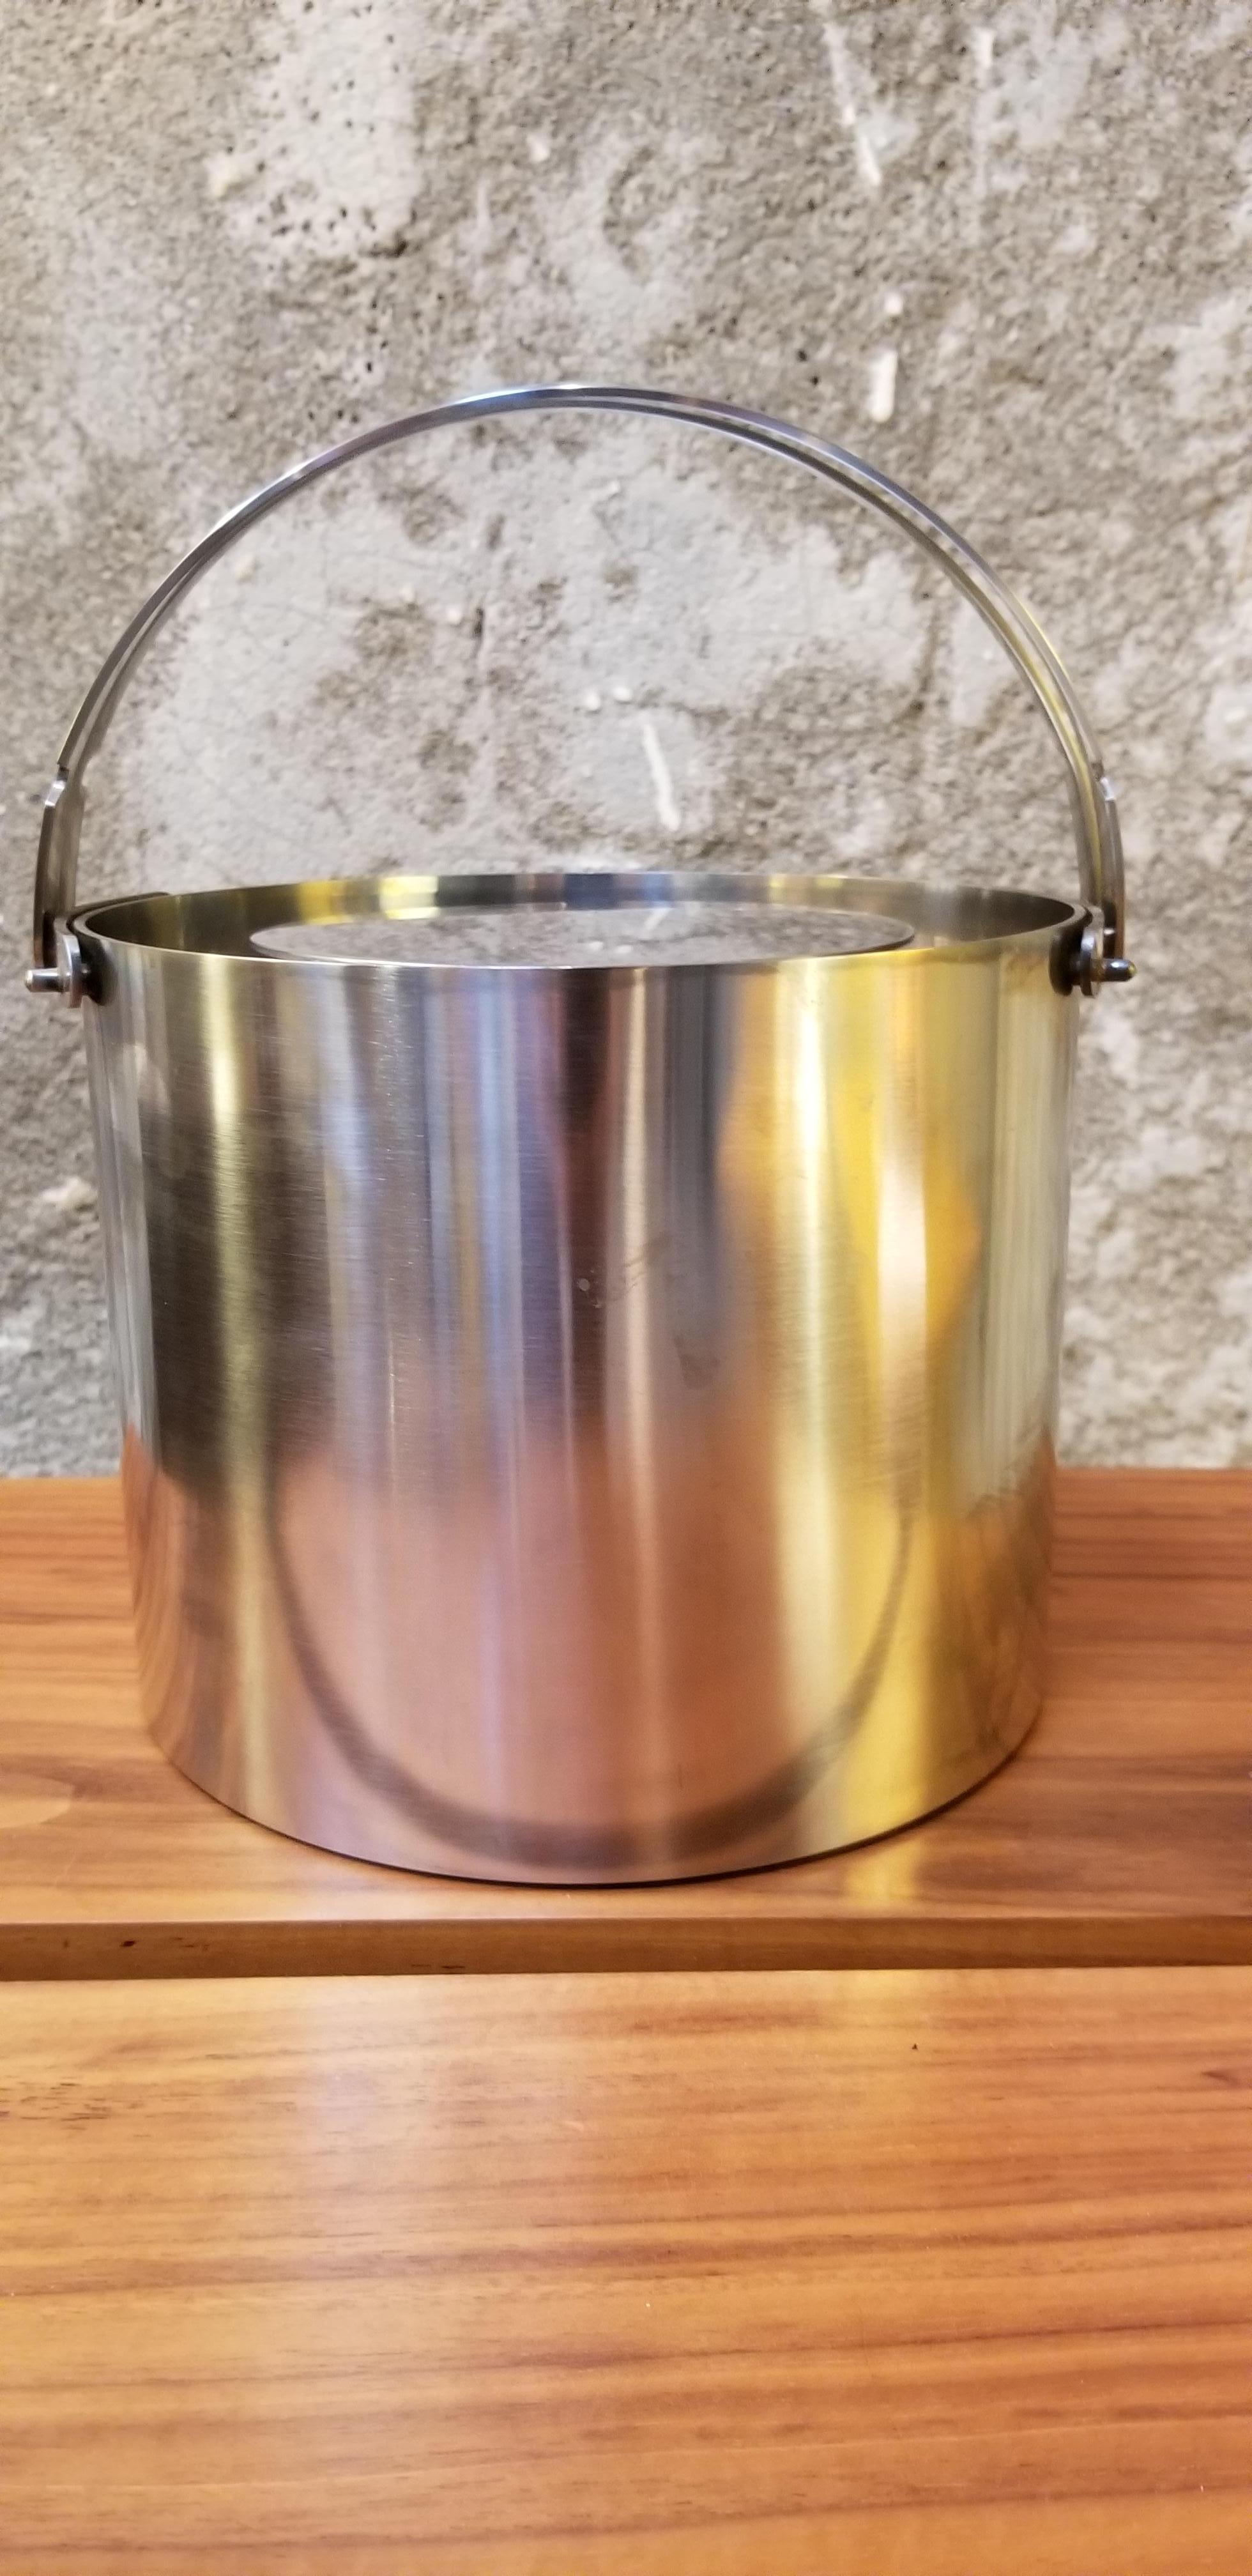 Vintage stainless steel ice bucket with tongs designed by Arne Jacobsen for Stelton. Both pieces signed. Bucket with handles lowered measures 5.75 inched tall.